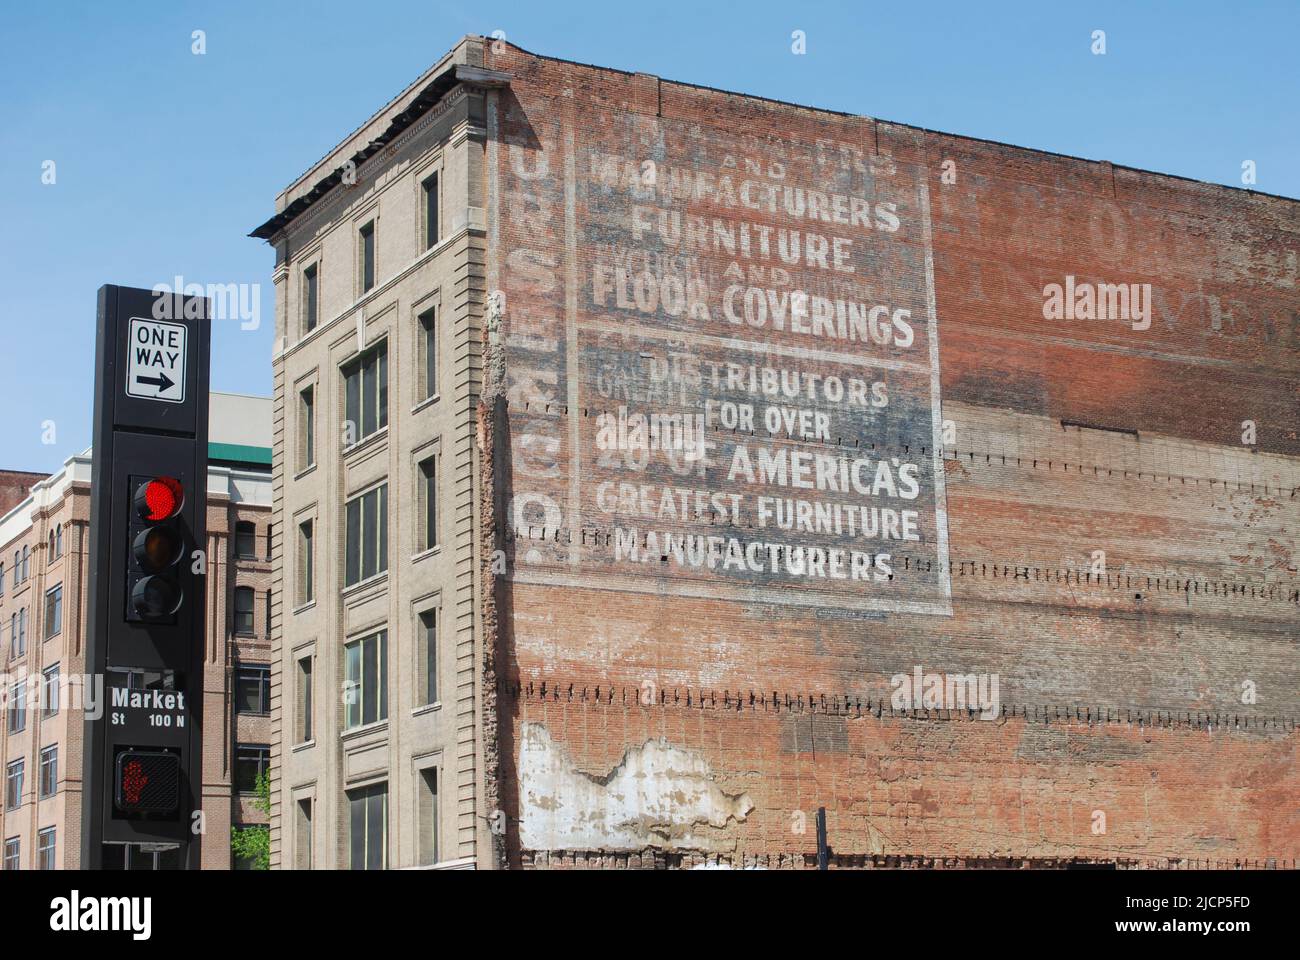 Building and old advertisment on side of the building, next to a red traffic light and one way sign on Market Street in Dallas Texas Stock Photo